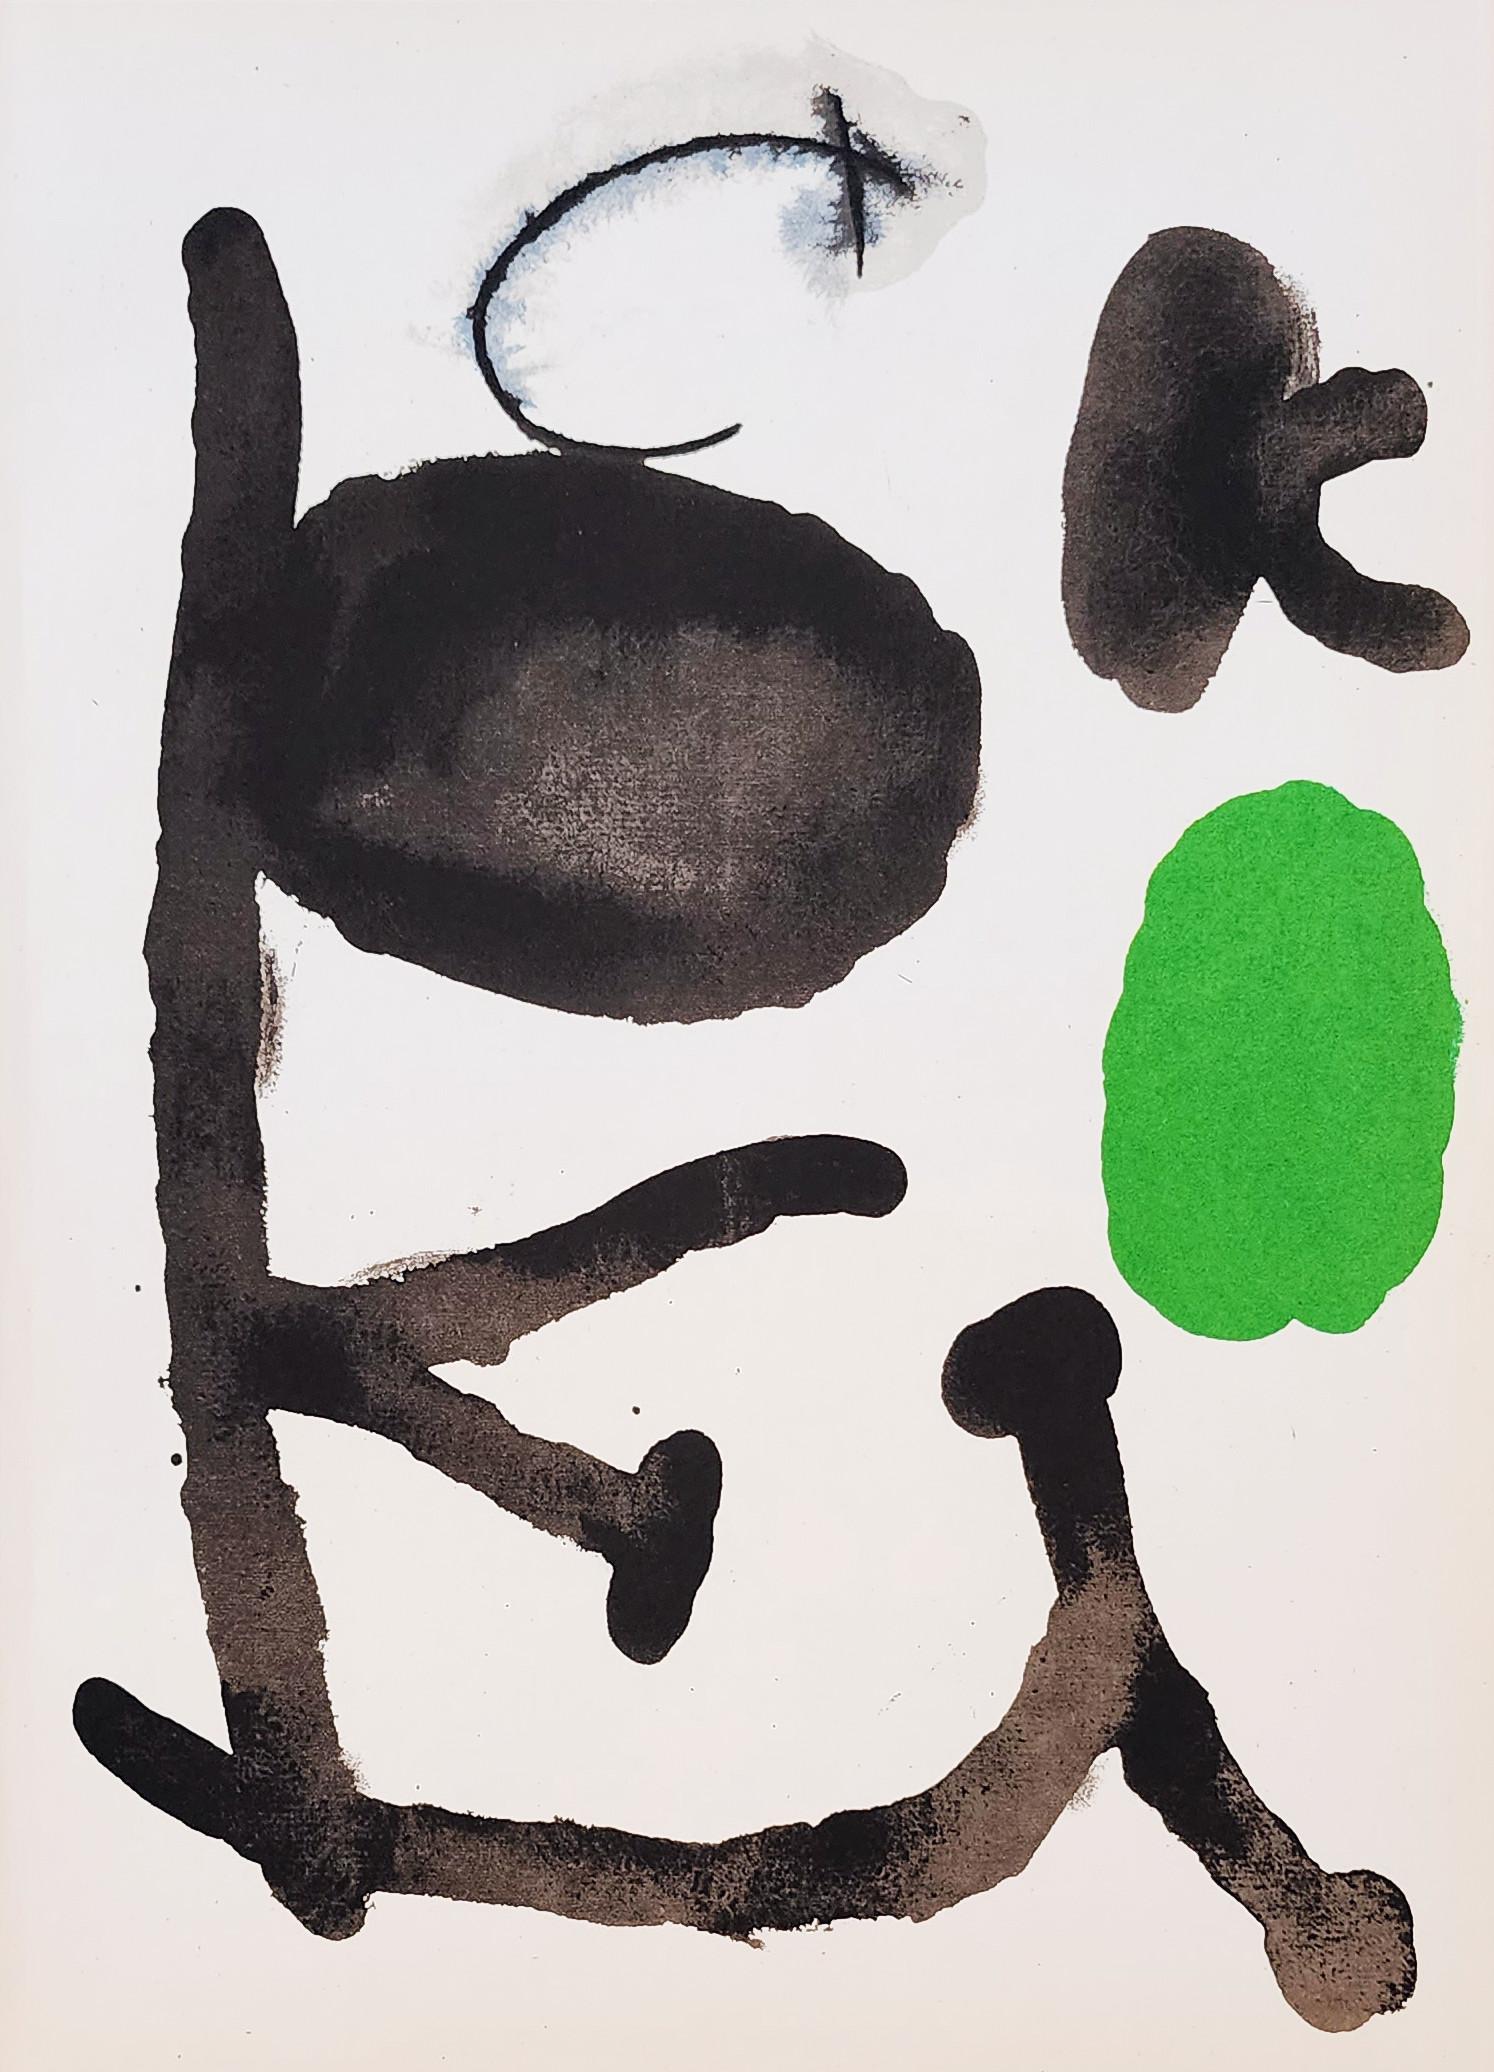 Abstract Print Joan Miró - Lithographie originale (expressionnisme abstrait)